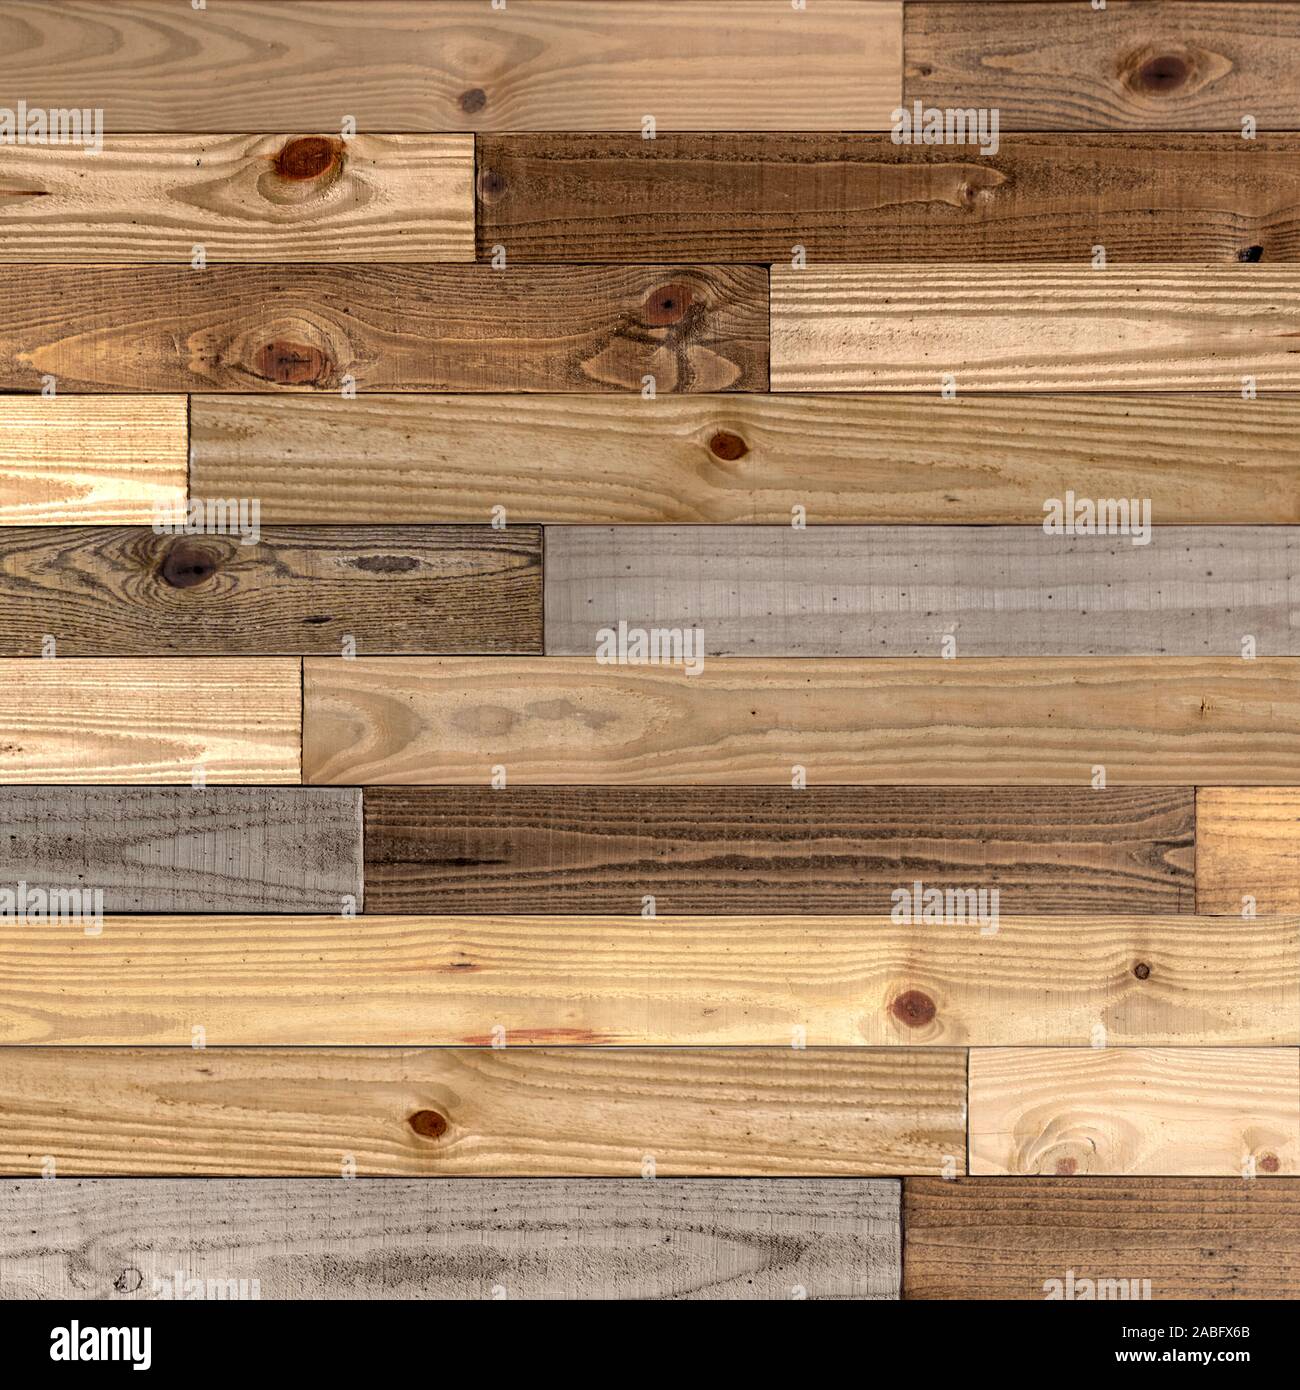 wooden wall panelling wallpaper Stock Photo